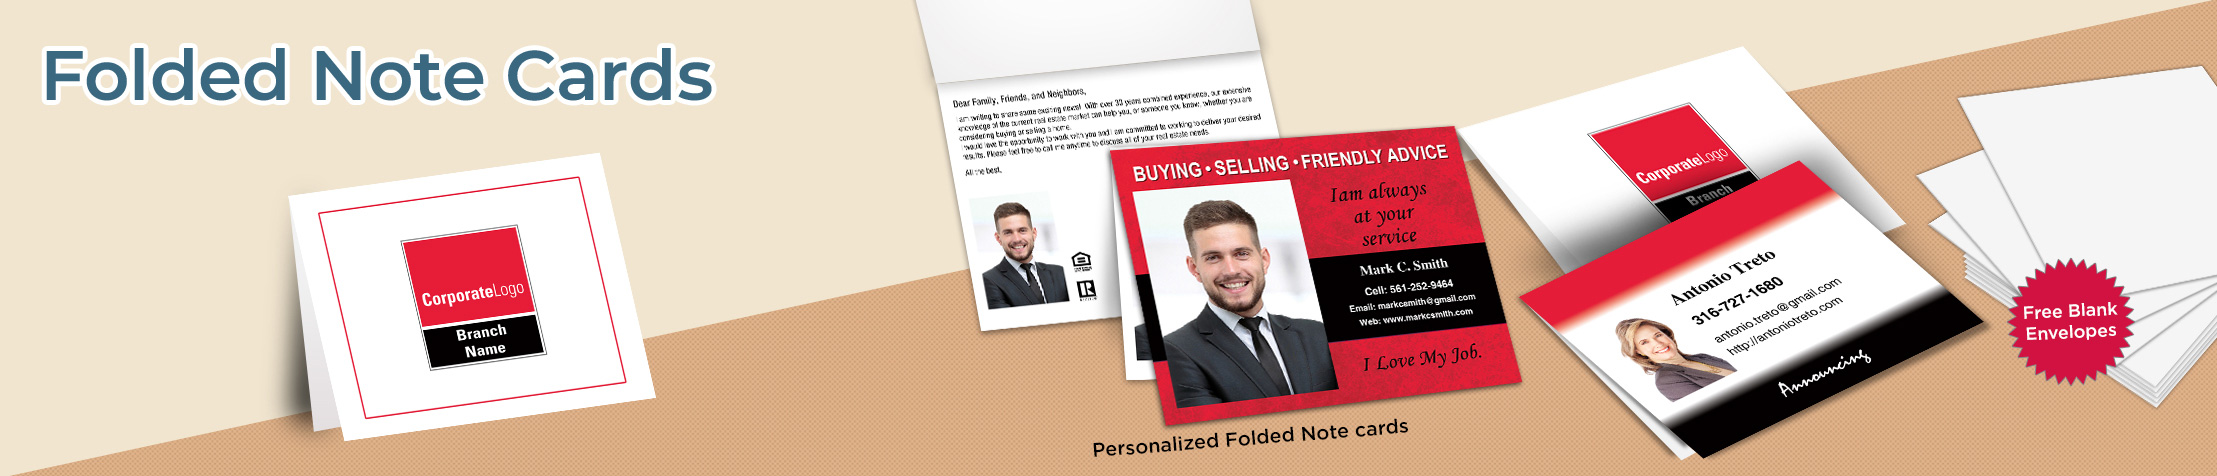 Real Living Real Estate Postcards -  postcard templates and direct mail postcard mailing services | BestPrintBuy.com